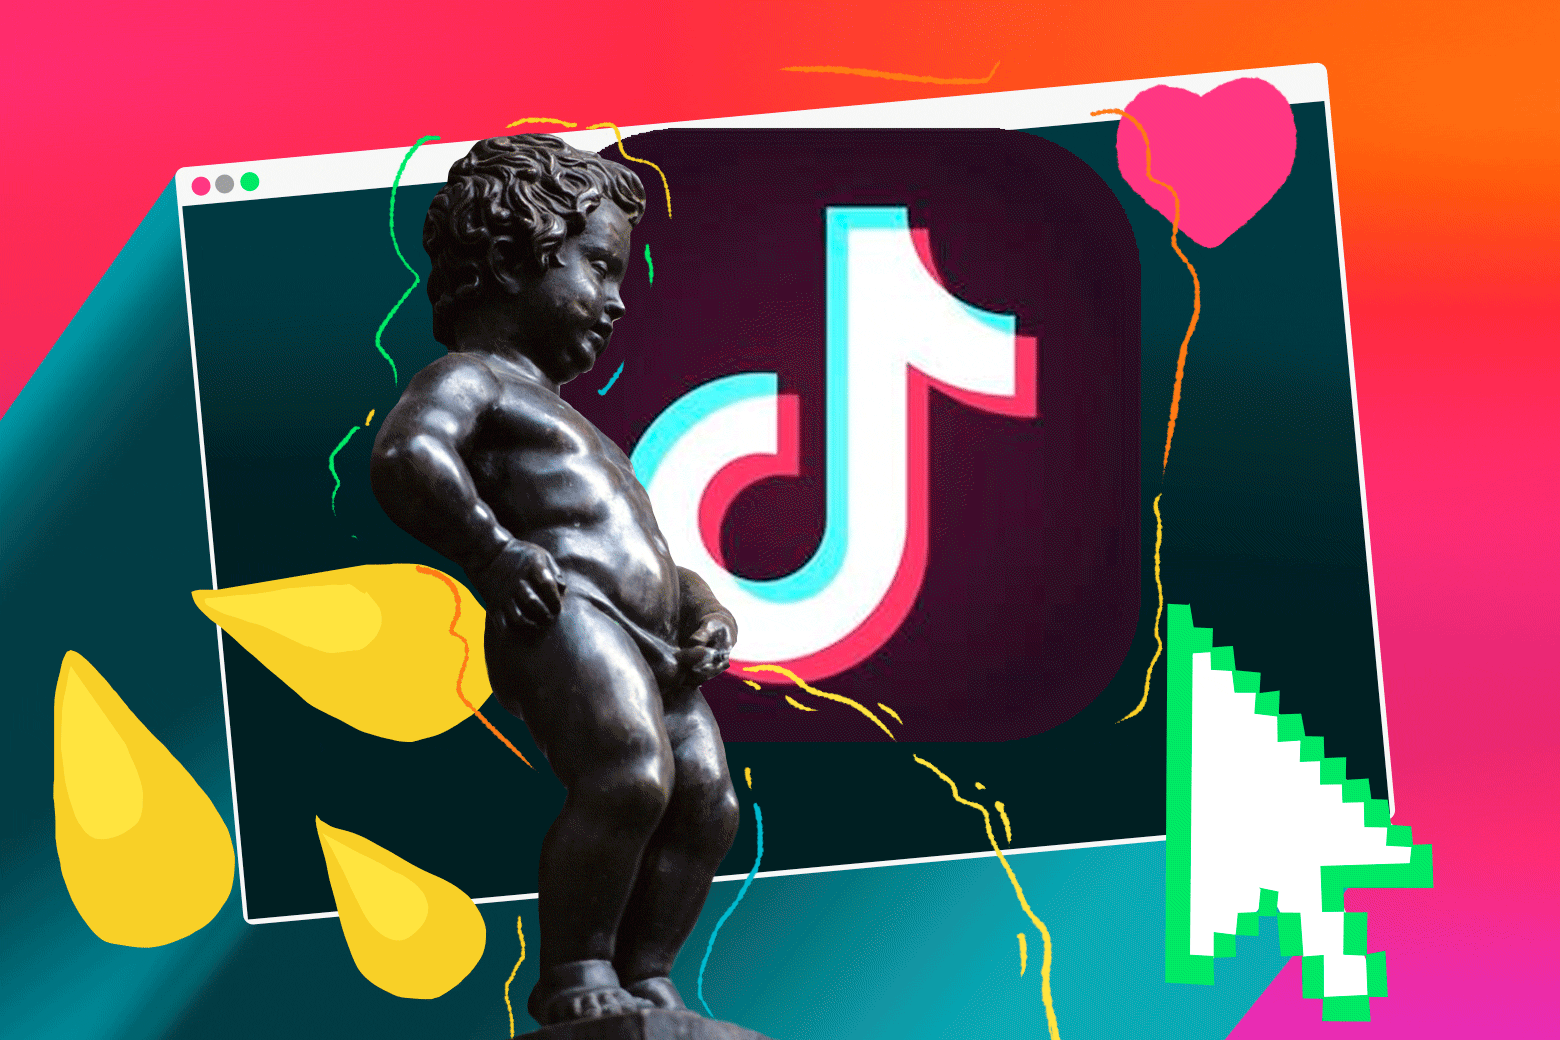 PissTok: What Watersports TikTok says about the memeification of kink.